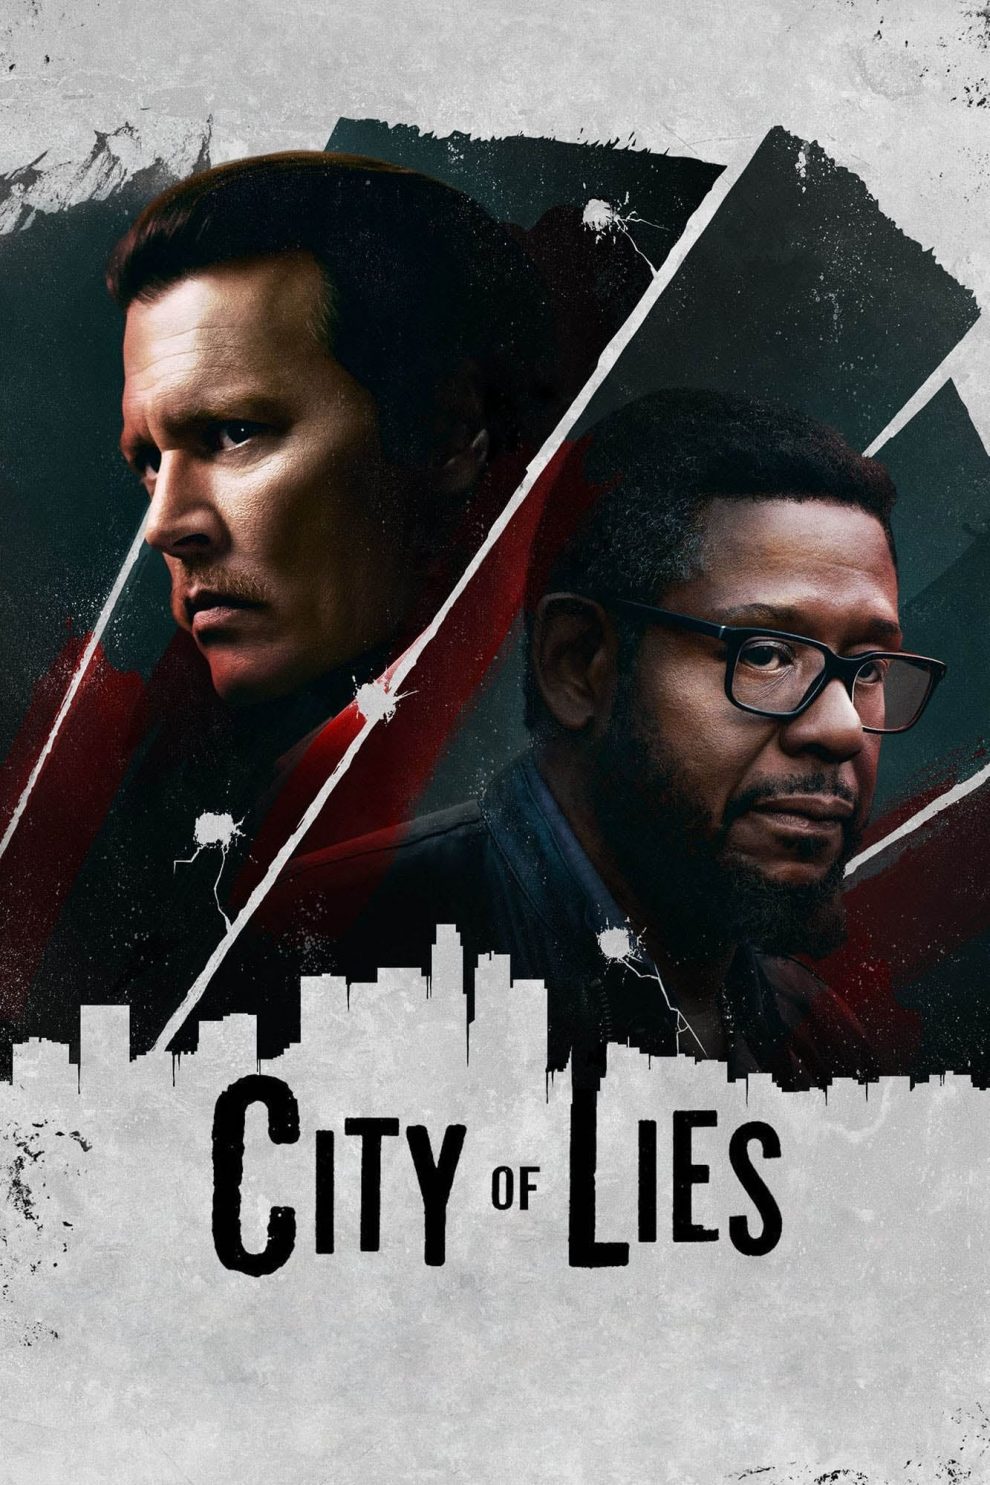 Poster for the movie "City of Lies"